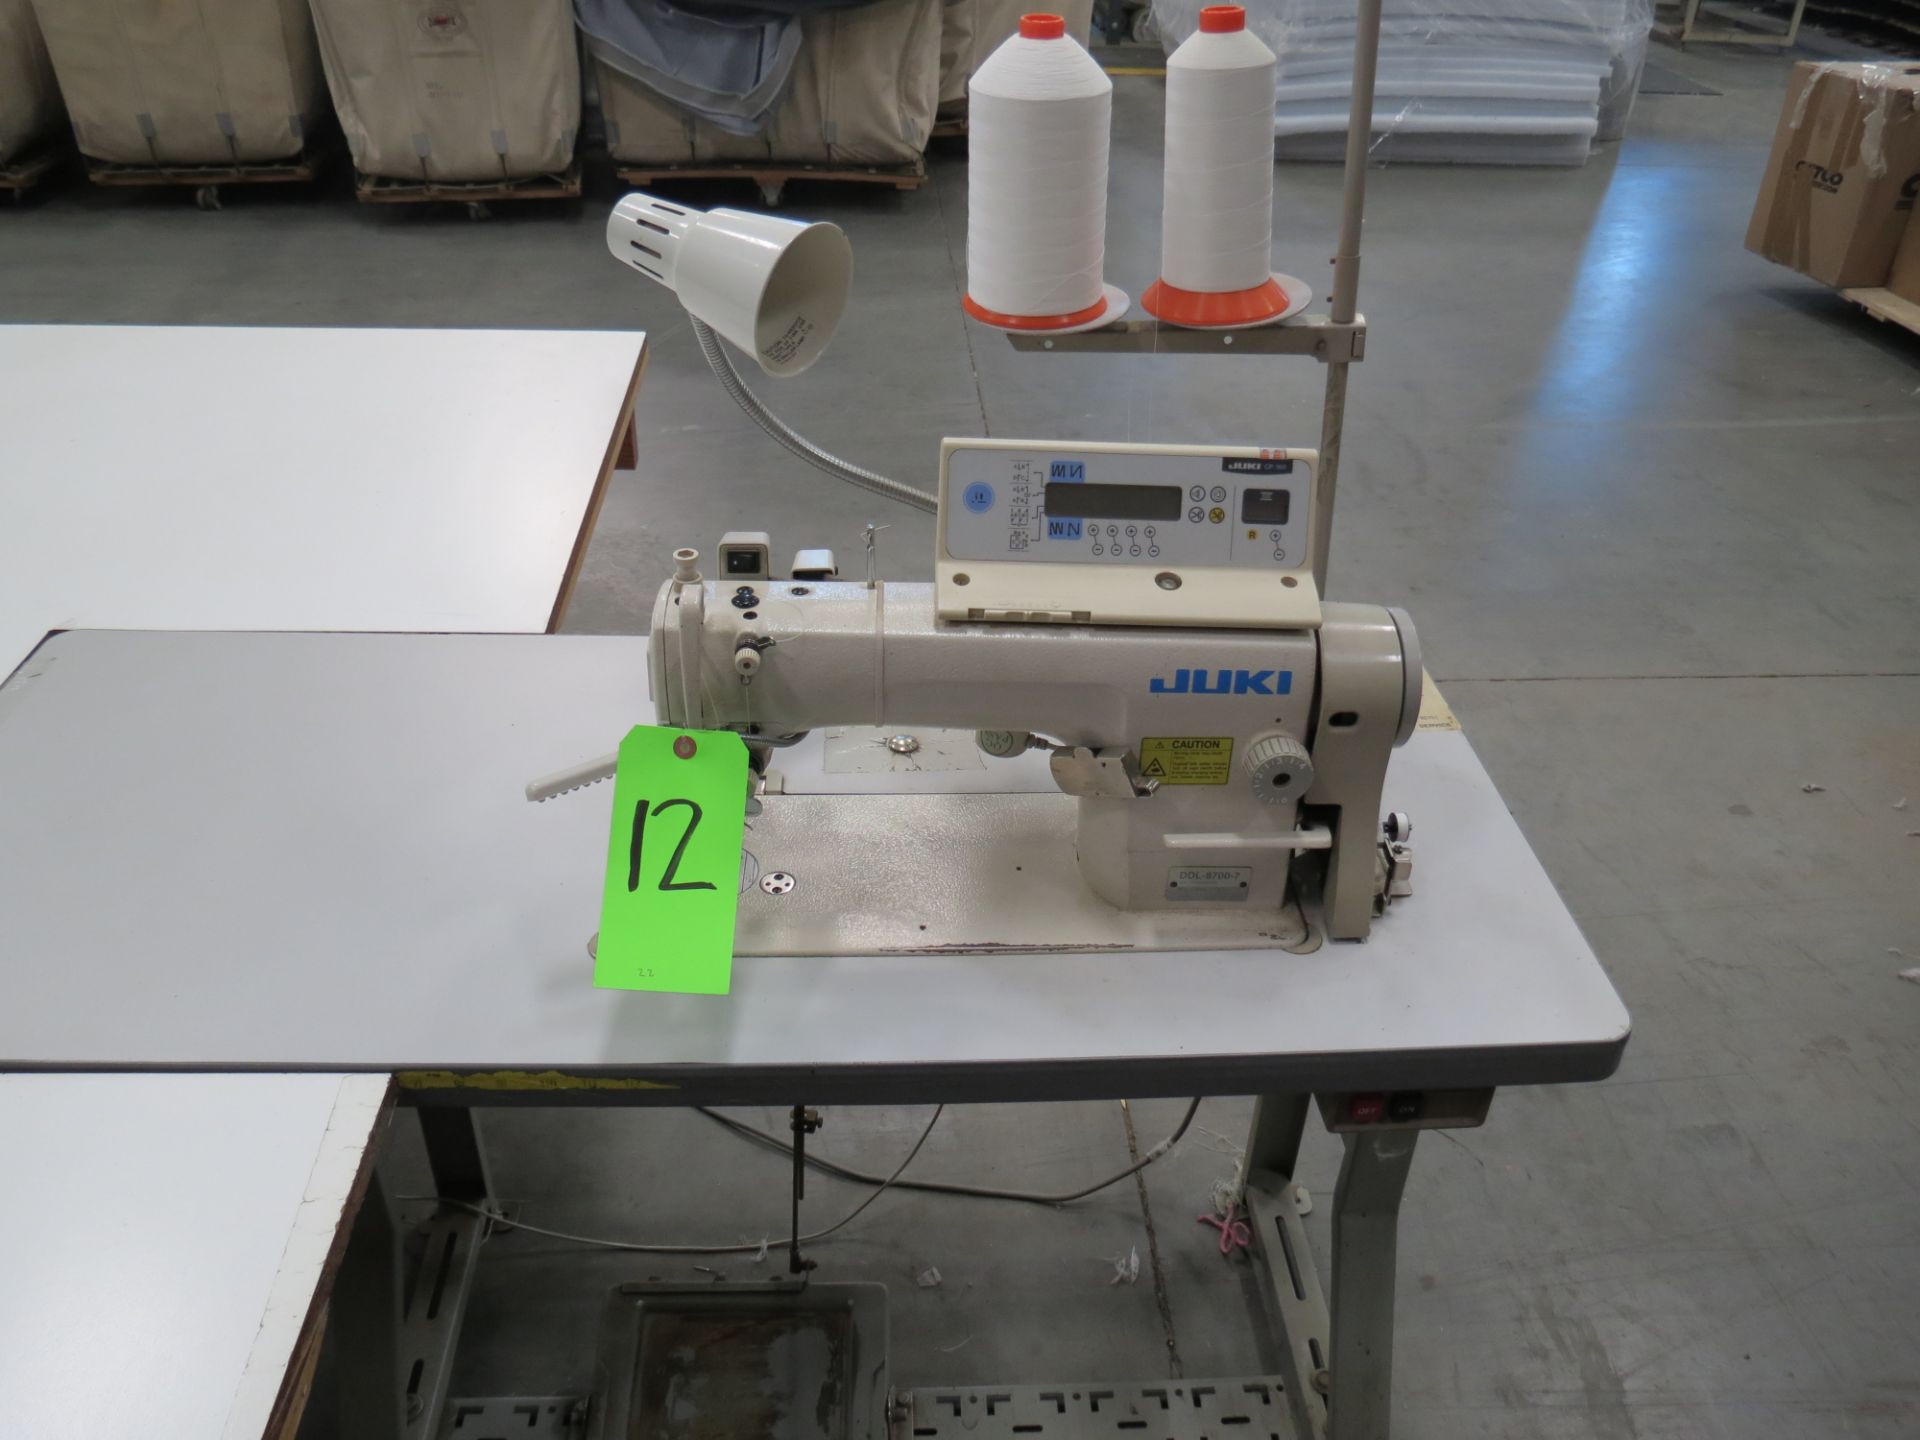 Juki DDL-8700-7Overlock Single Needle Sewing Machine, 110V, SN: 4DOZG12790 with Table - Image 2 of 3